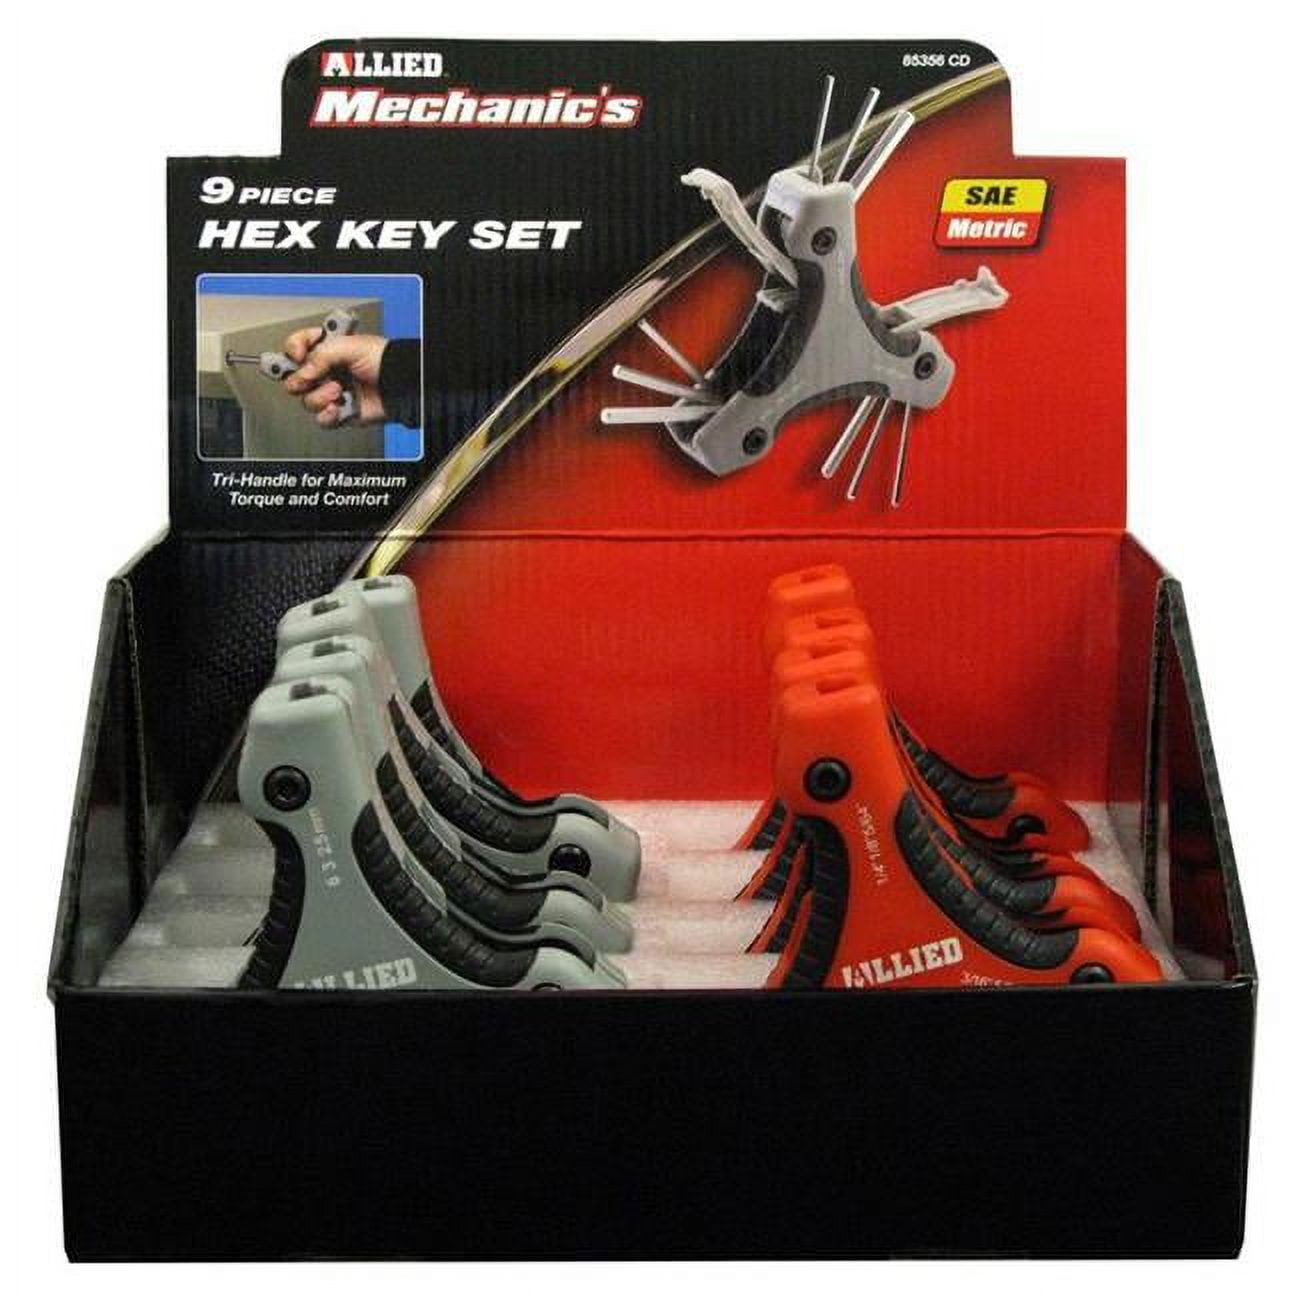 Picture of Allied 85356CD Folding Hex Key Set - 9 Piece